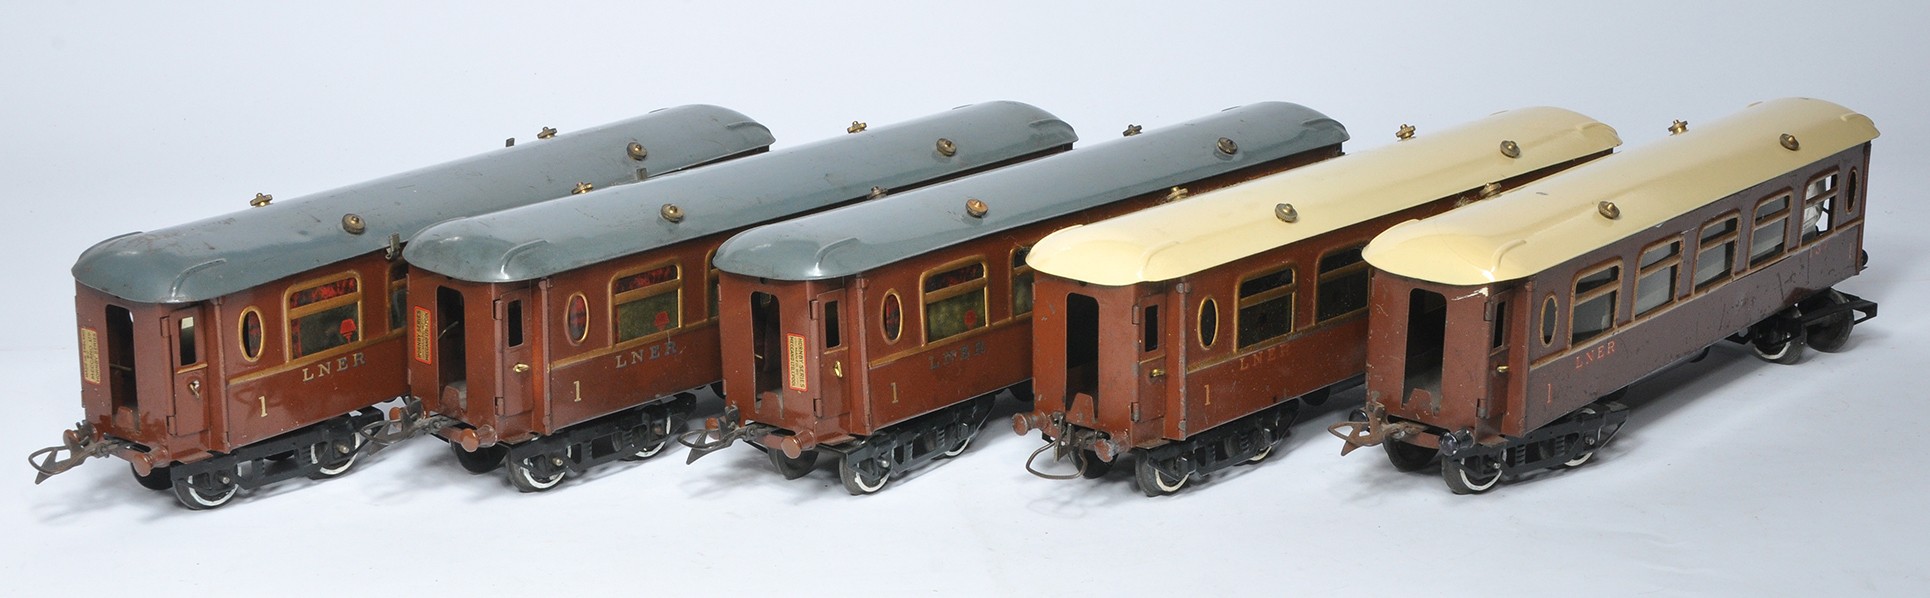 Hornby O Gauge Model Railway comprising five LNER Coaches as shown. Generally display good to very